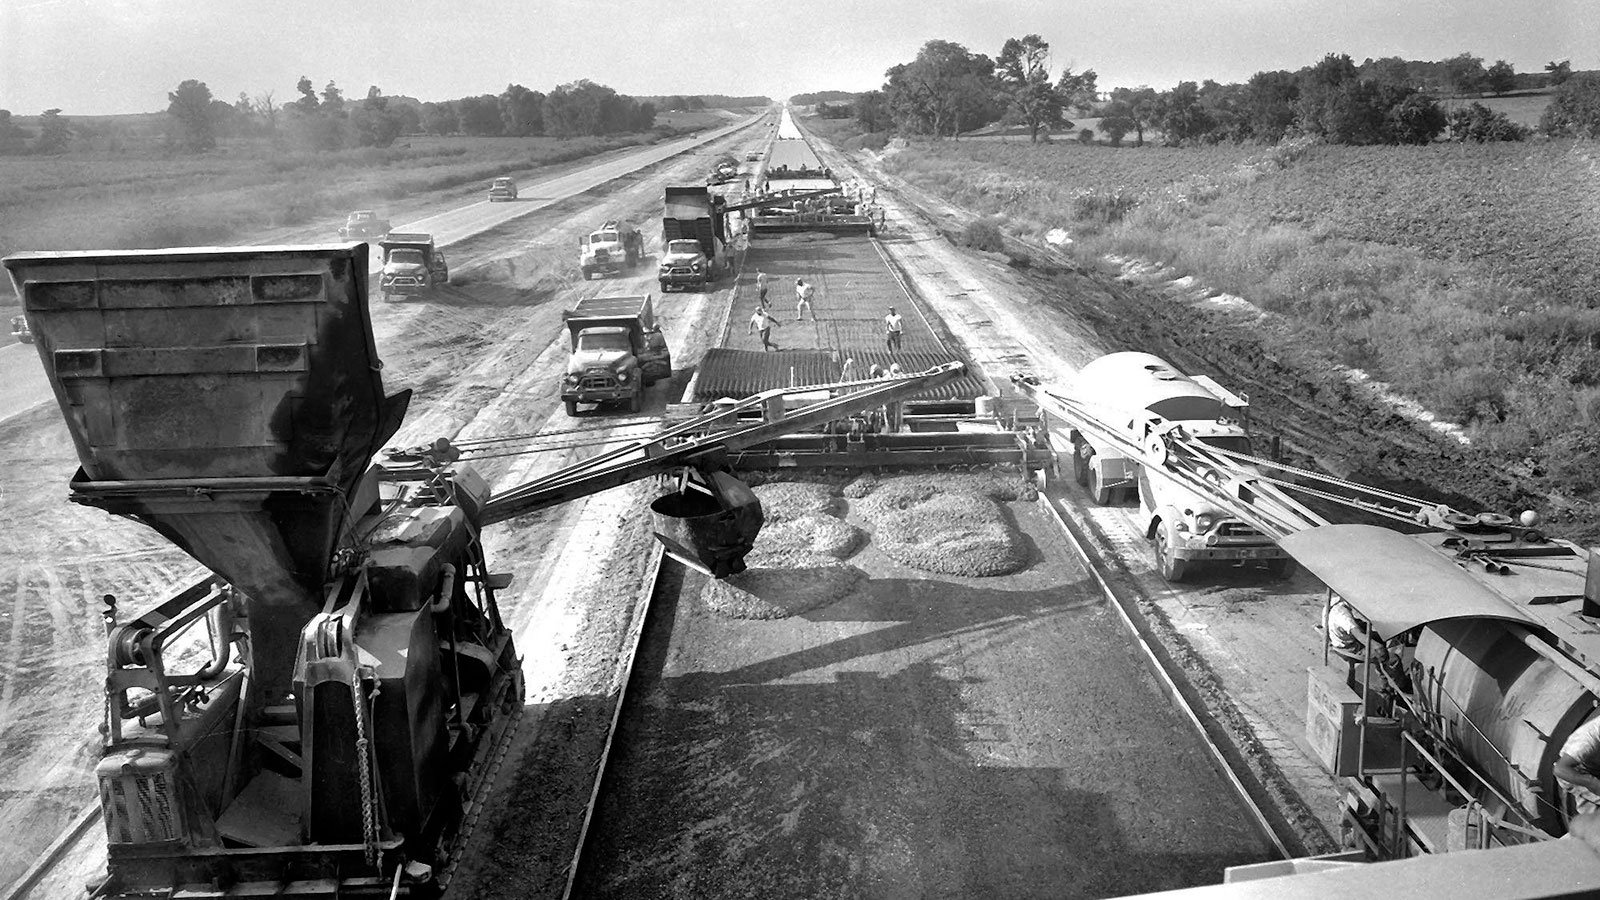 This photo is believed to show construction of Interstate 55 in Missouri in the early 1960s